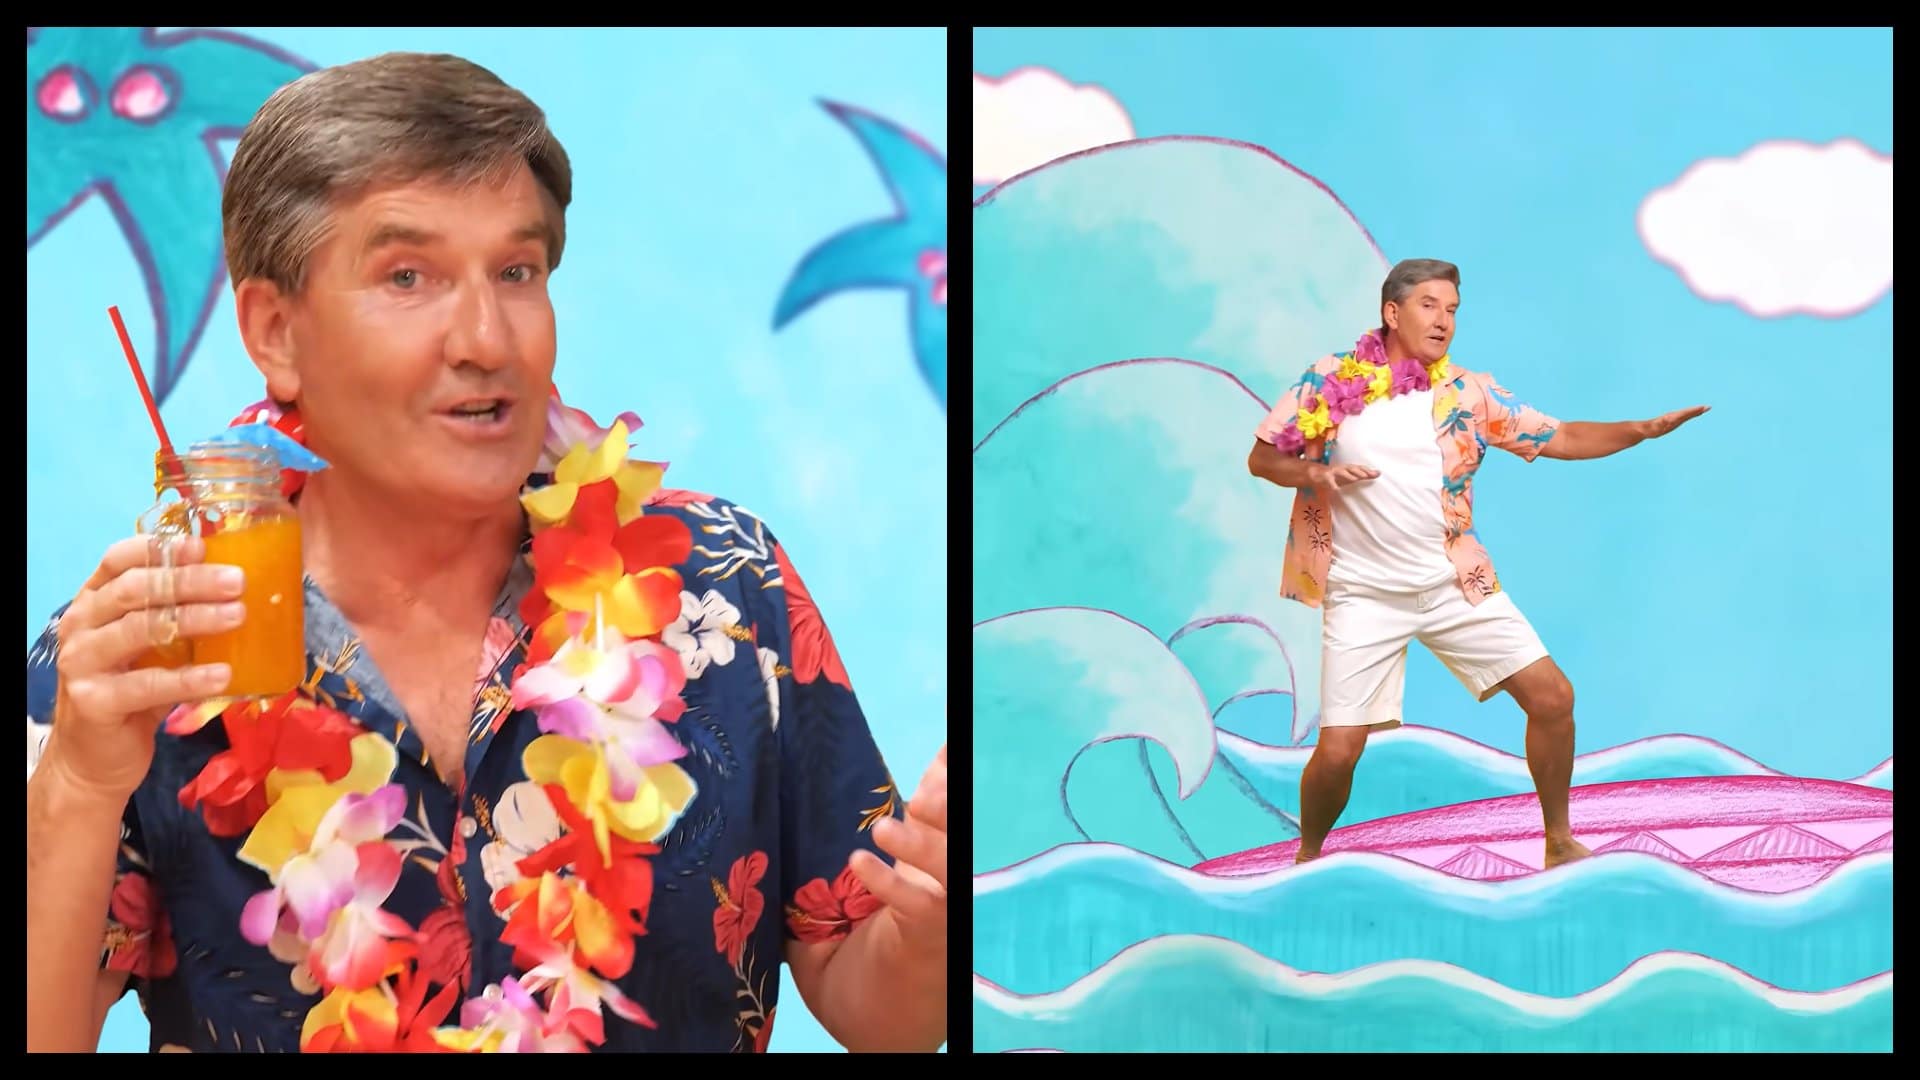 Daniel O'Donnell's new music video is here and it's HILARIOUS (WATCH)